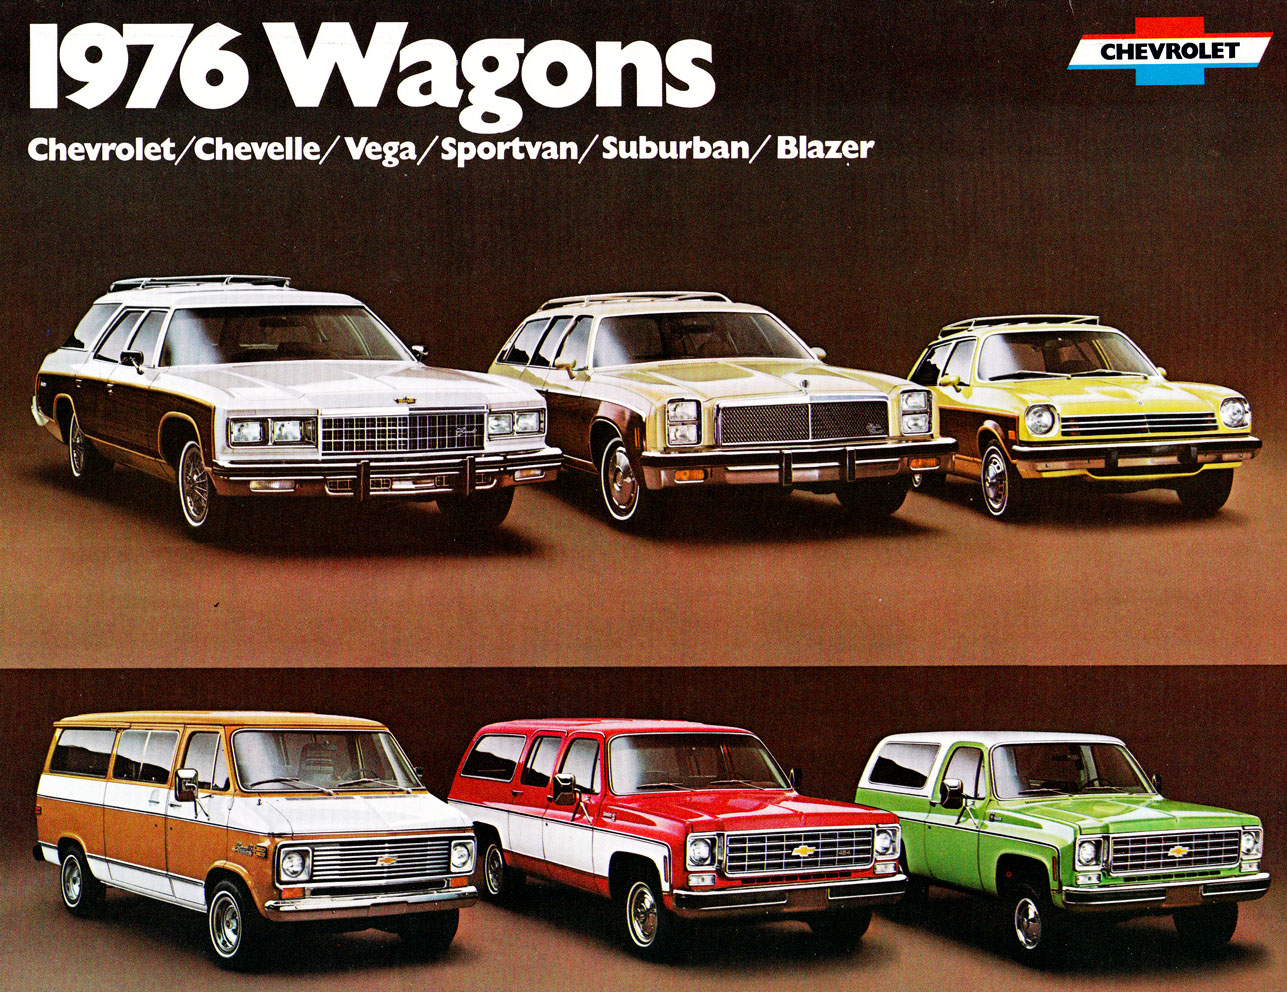 1976 Chevrolet Wagons Brochure Page 18